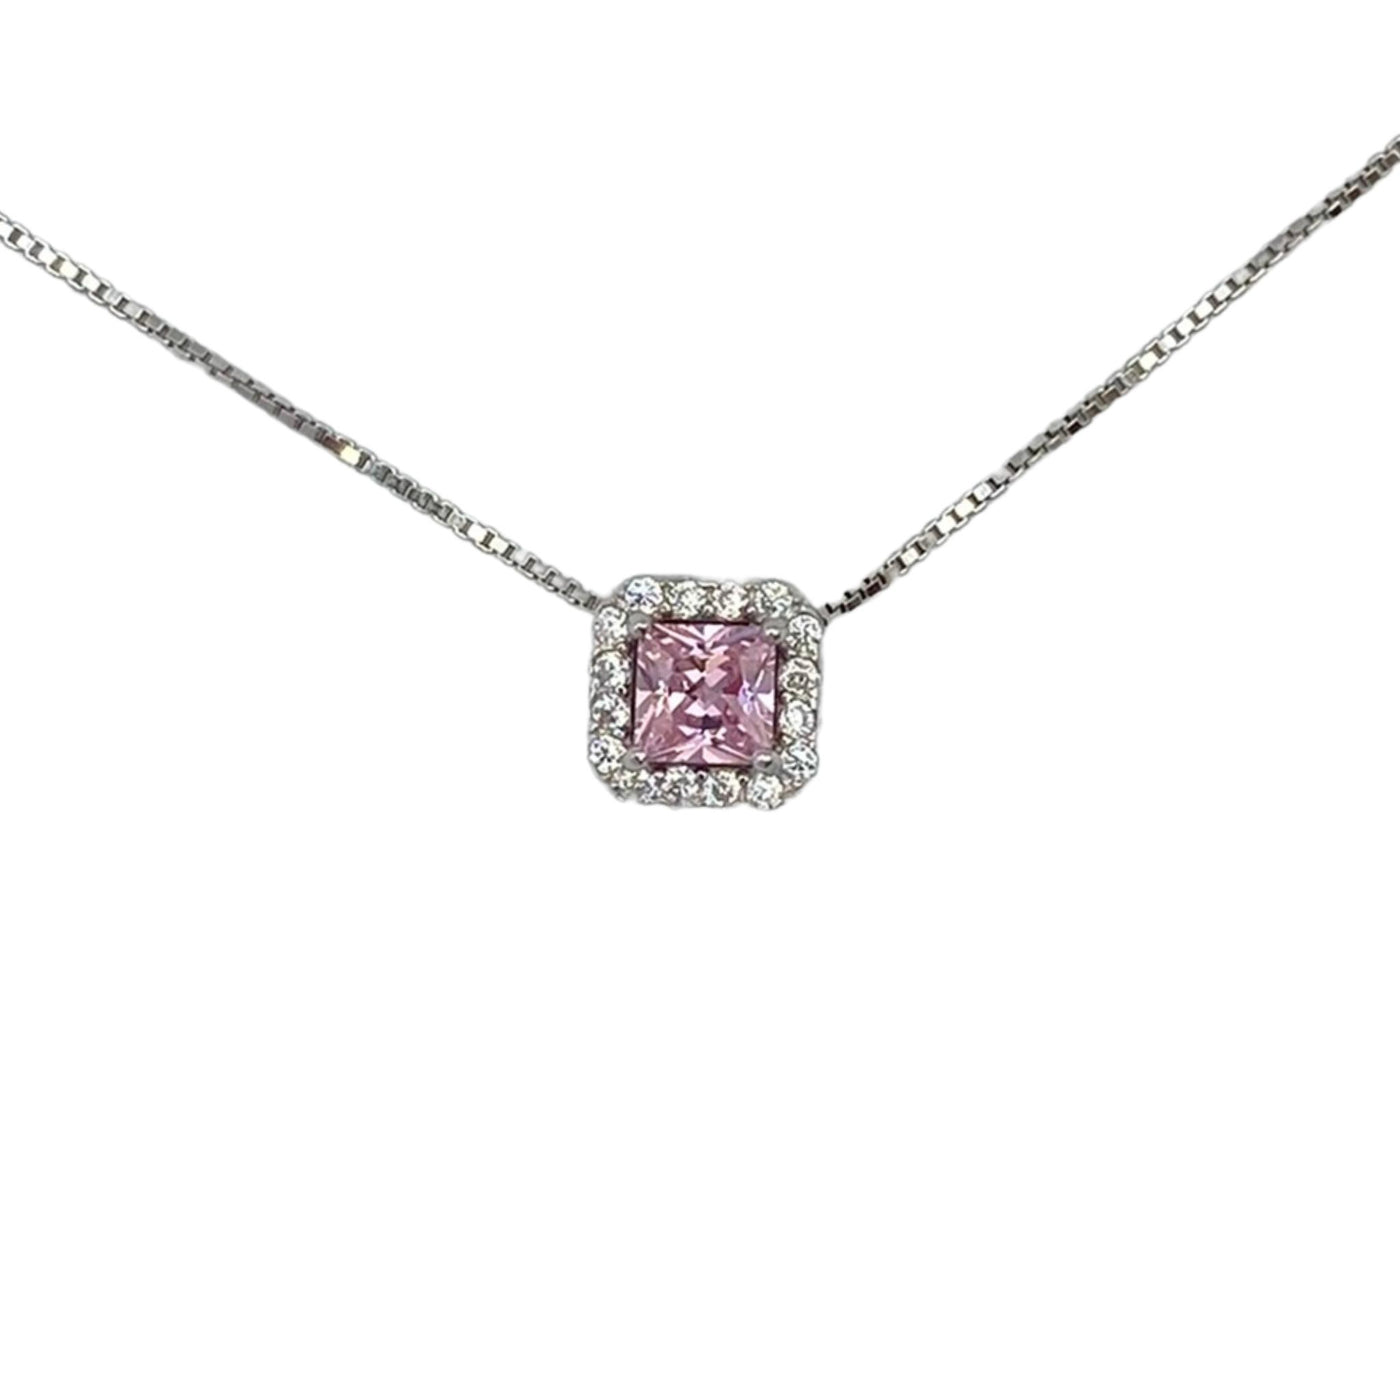 Silver necklace with carrè stone charm - rhodium